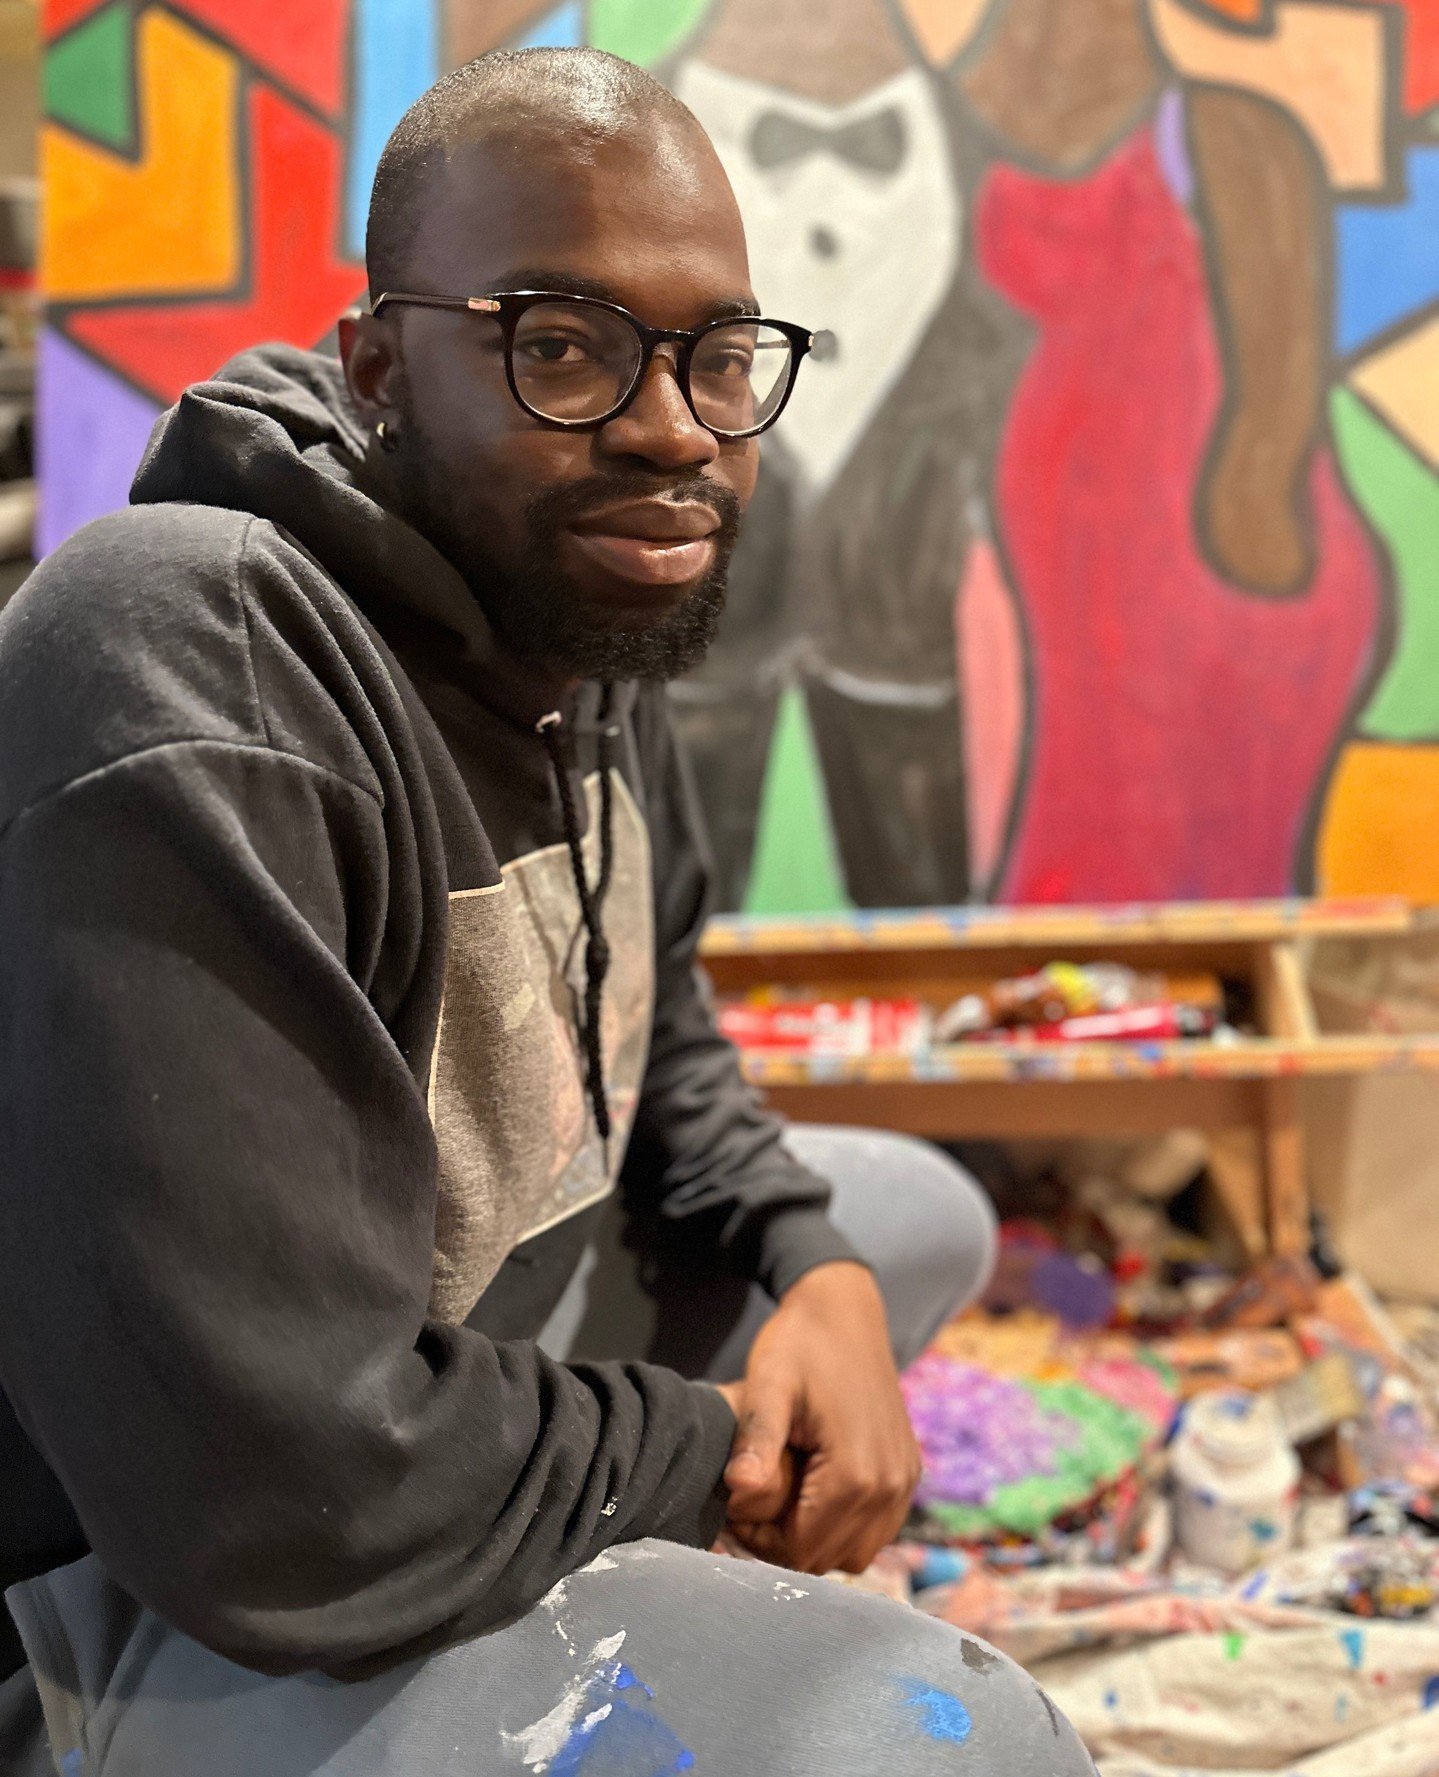 We're back with another #StudioVisitSunday and we're pleased to present the work of Kenny Delino!⁠
⁠
Kenny Delino (b. 1998) is a Haitian-American artist based in Boston. He began painting in 2020 in the midst of the global pandemic. Through his art, 